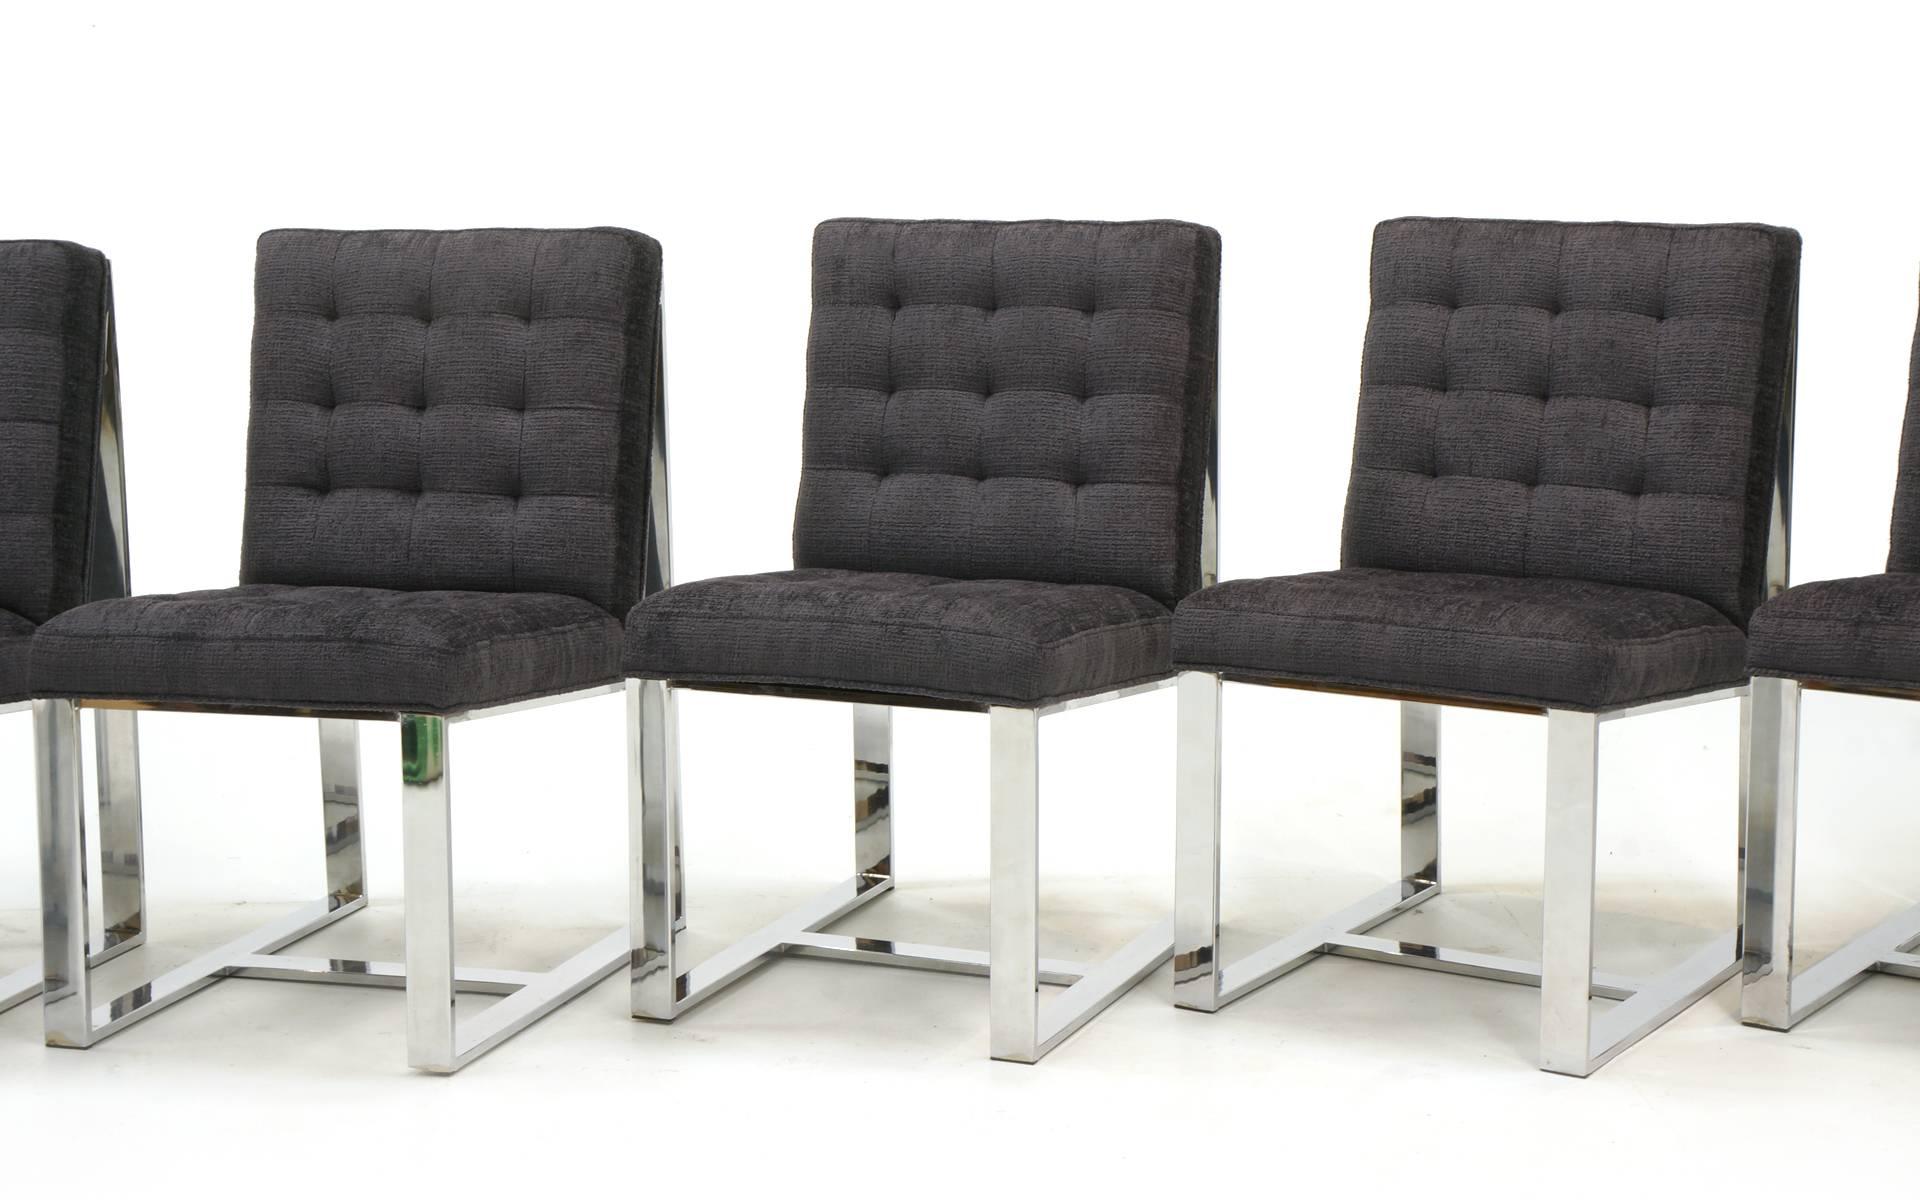 Milo Baughman dining chairs, set of six, restored and reupholstered in a Robert Allen Charcoal Chaneille fabric. Heavy chrome frames.  Two chairs show a good deal of pitting to the base of the chrome frames.